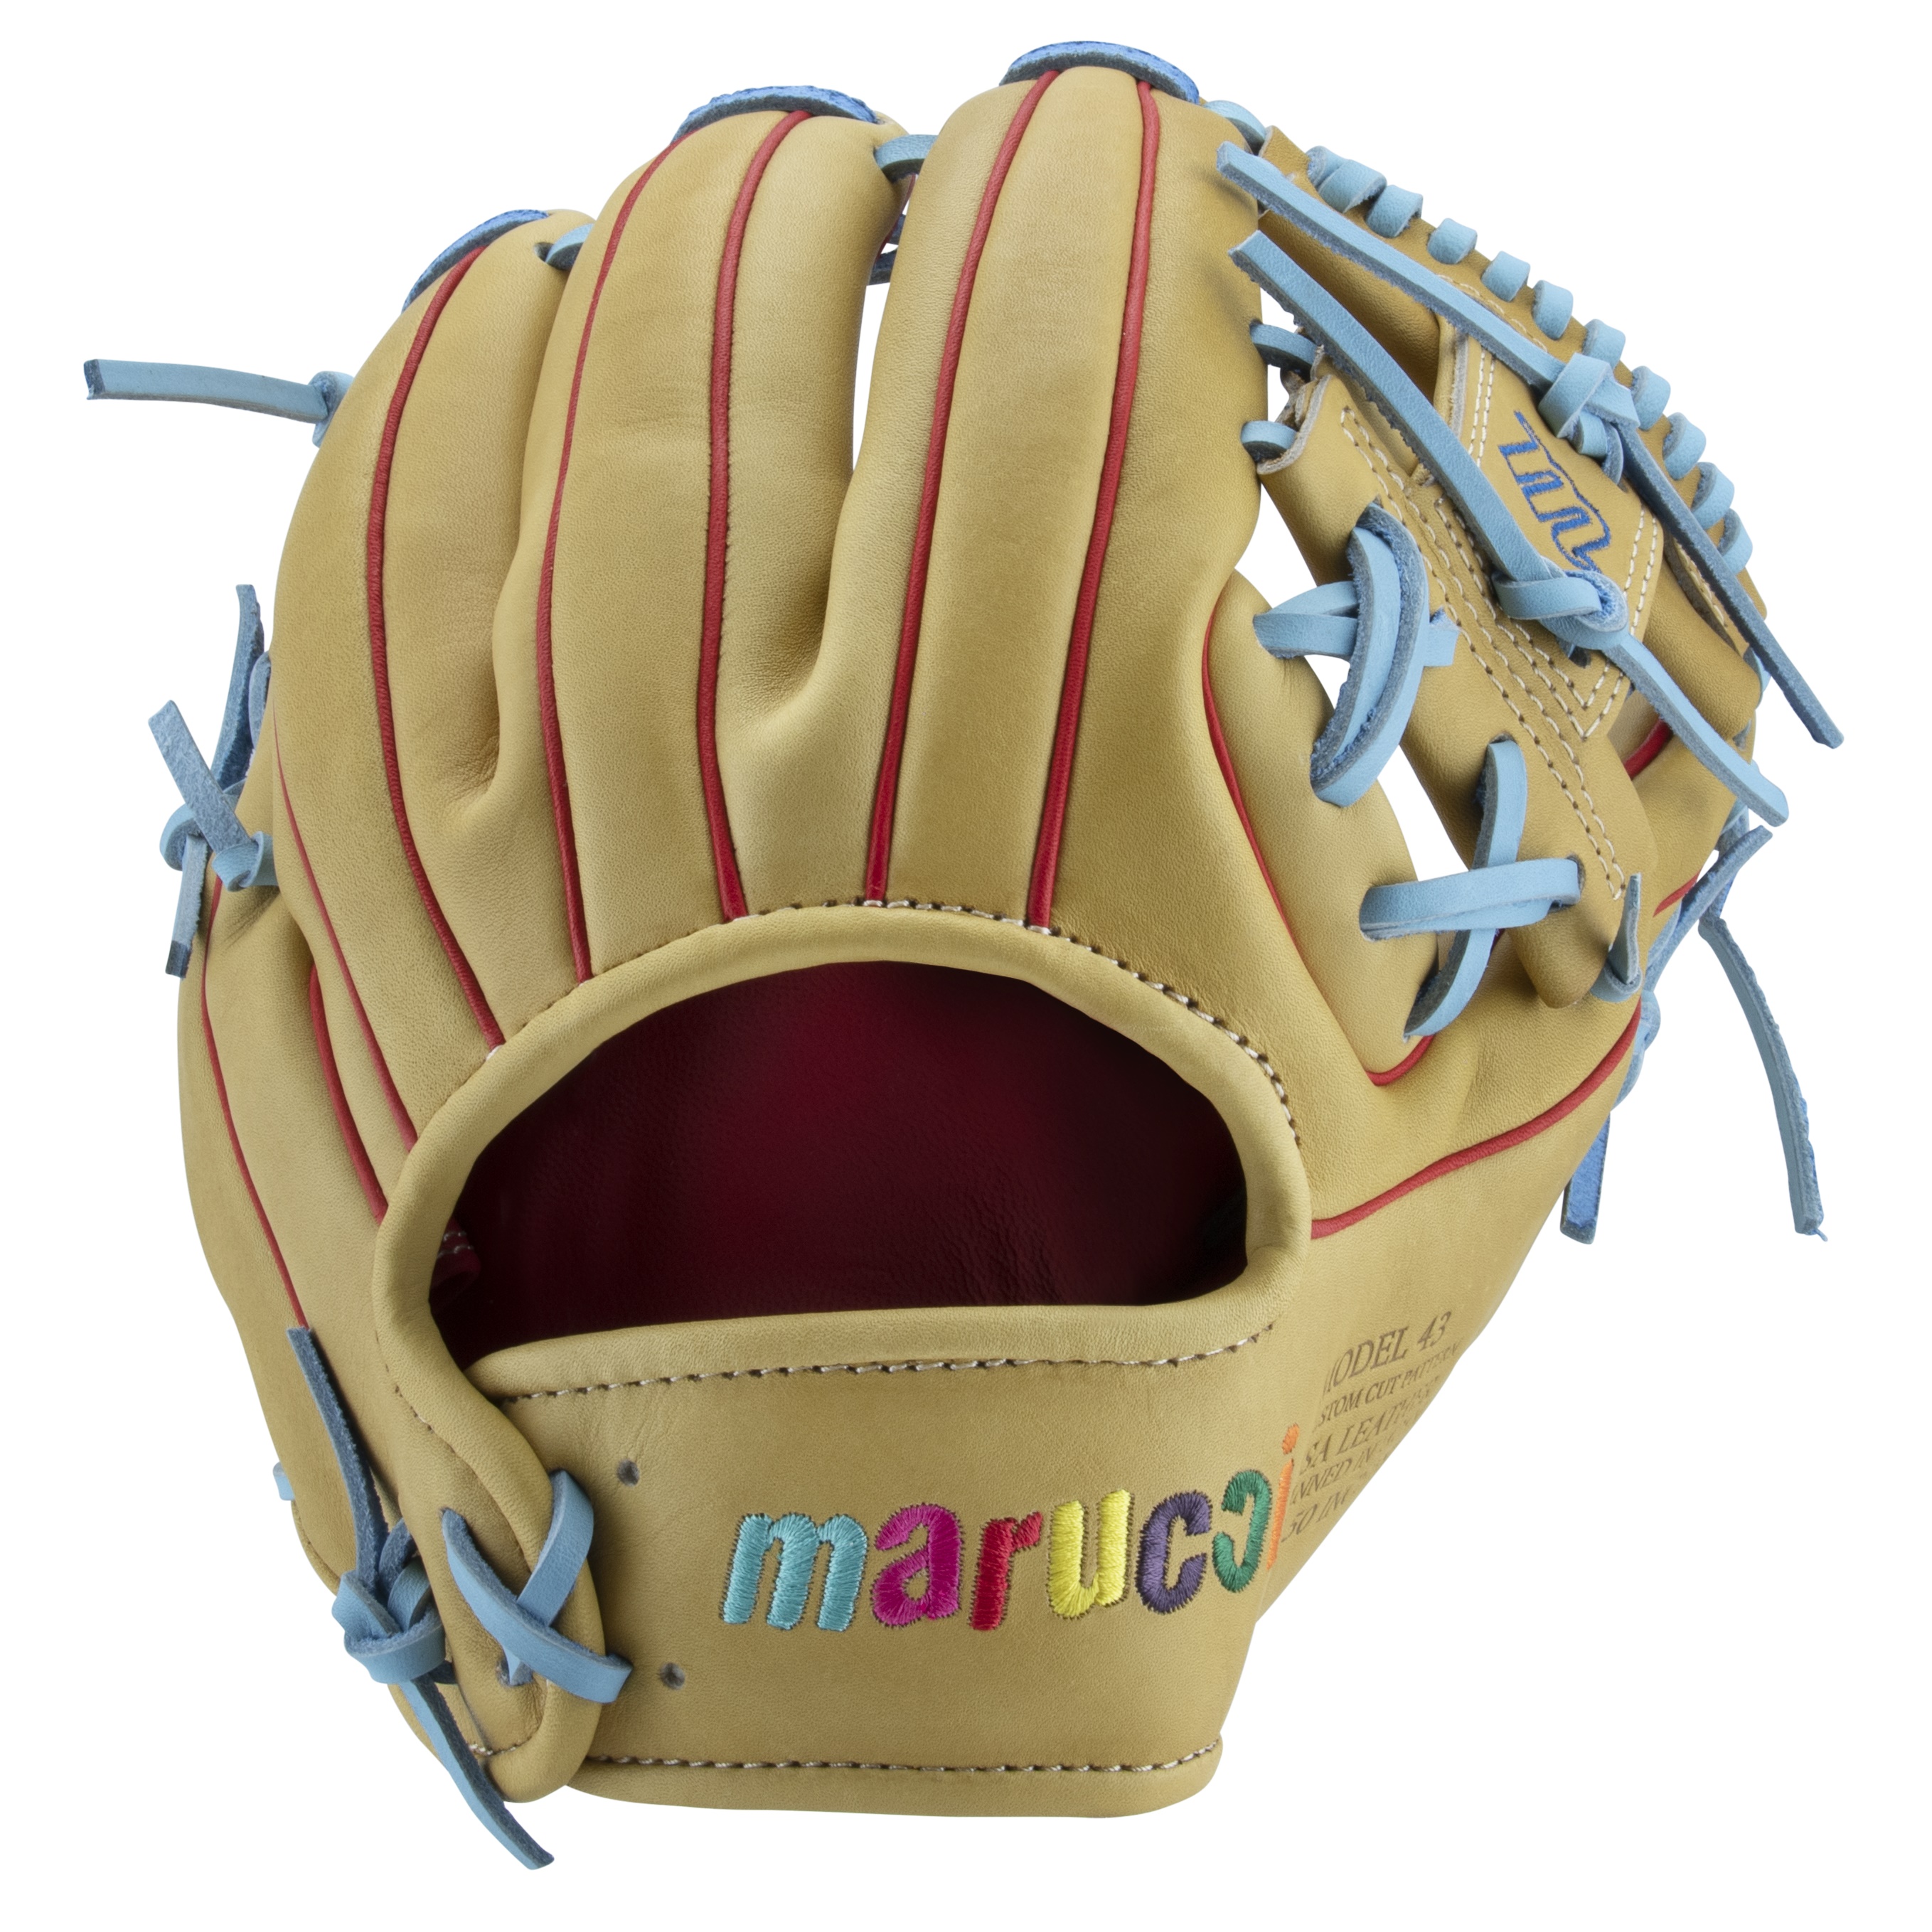 marucci-nightshift-baseball-glove-11-5-coloring-book-right-hand-throw MFGNTSHFT-0105-RightHandThrow   <div class=document_vyy0c8> <div class=pdfViewer viewer_azagep removePageBorders> <div class=page data-page-number=1 data-loaded=true> <div